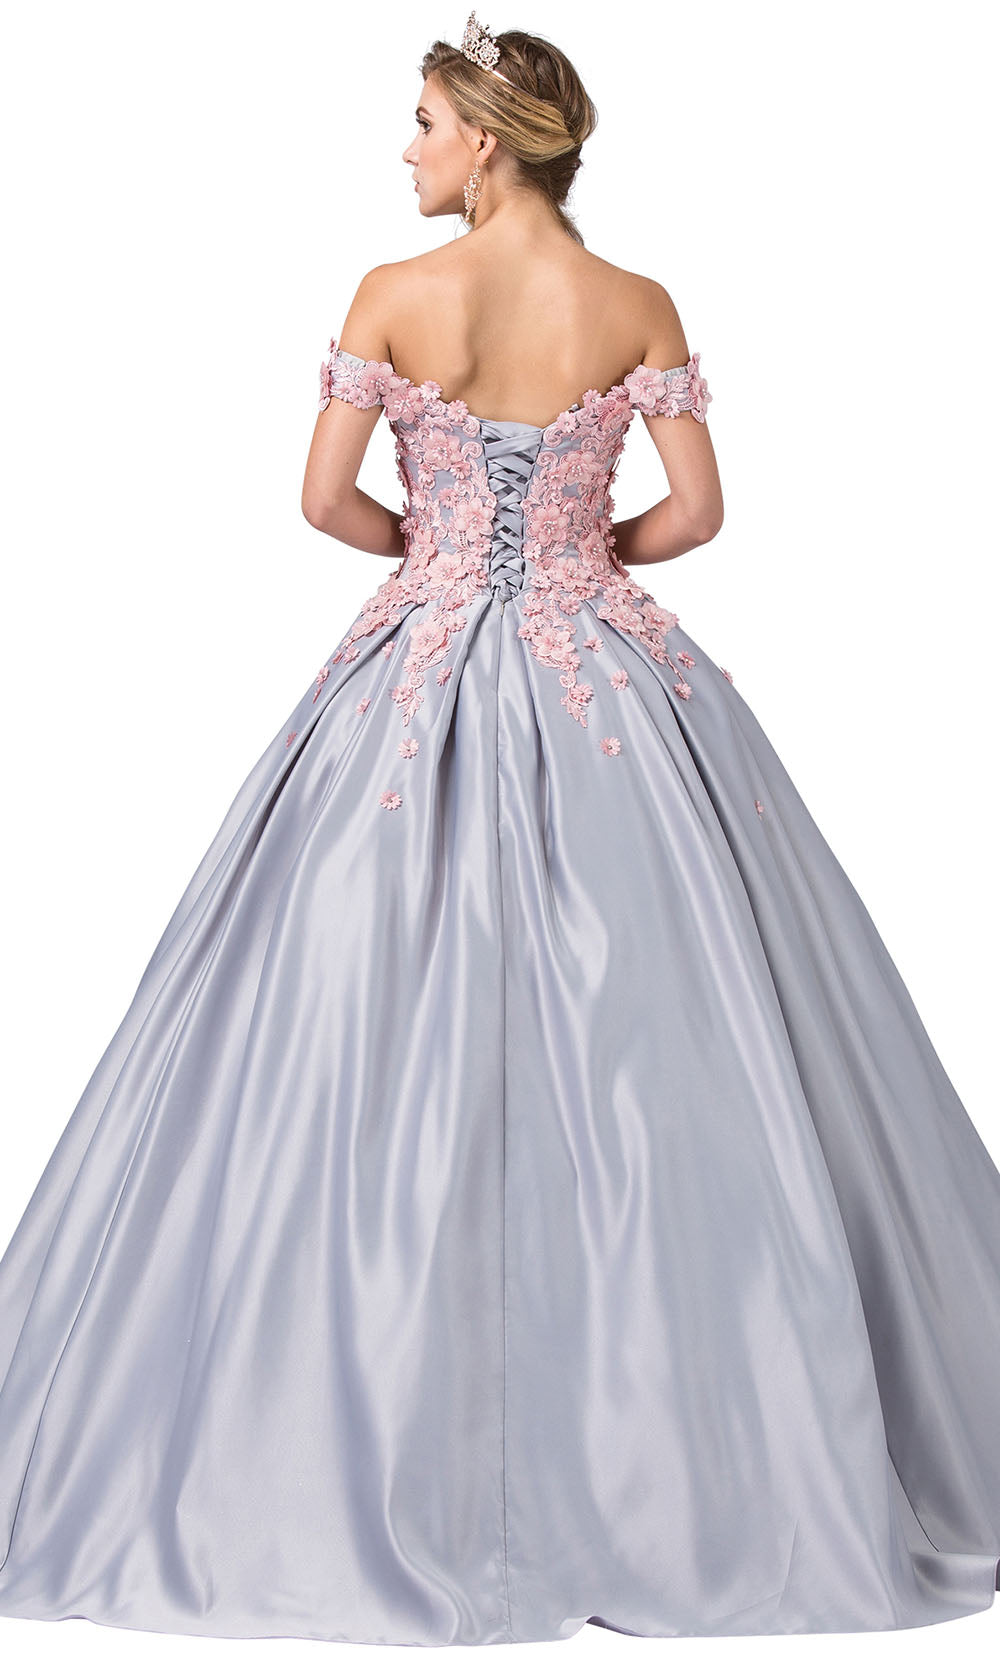 Dancing Queen - 1388 Off Shoulder Floral Metallic Ballgown In Silver and Pink